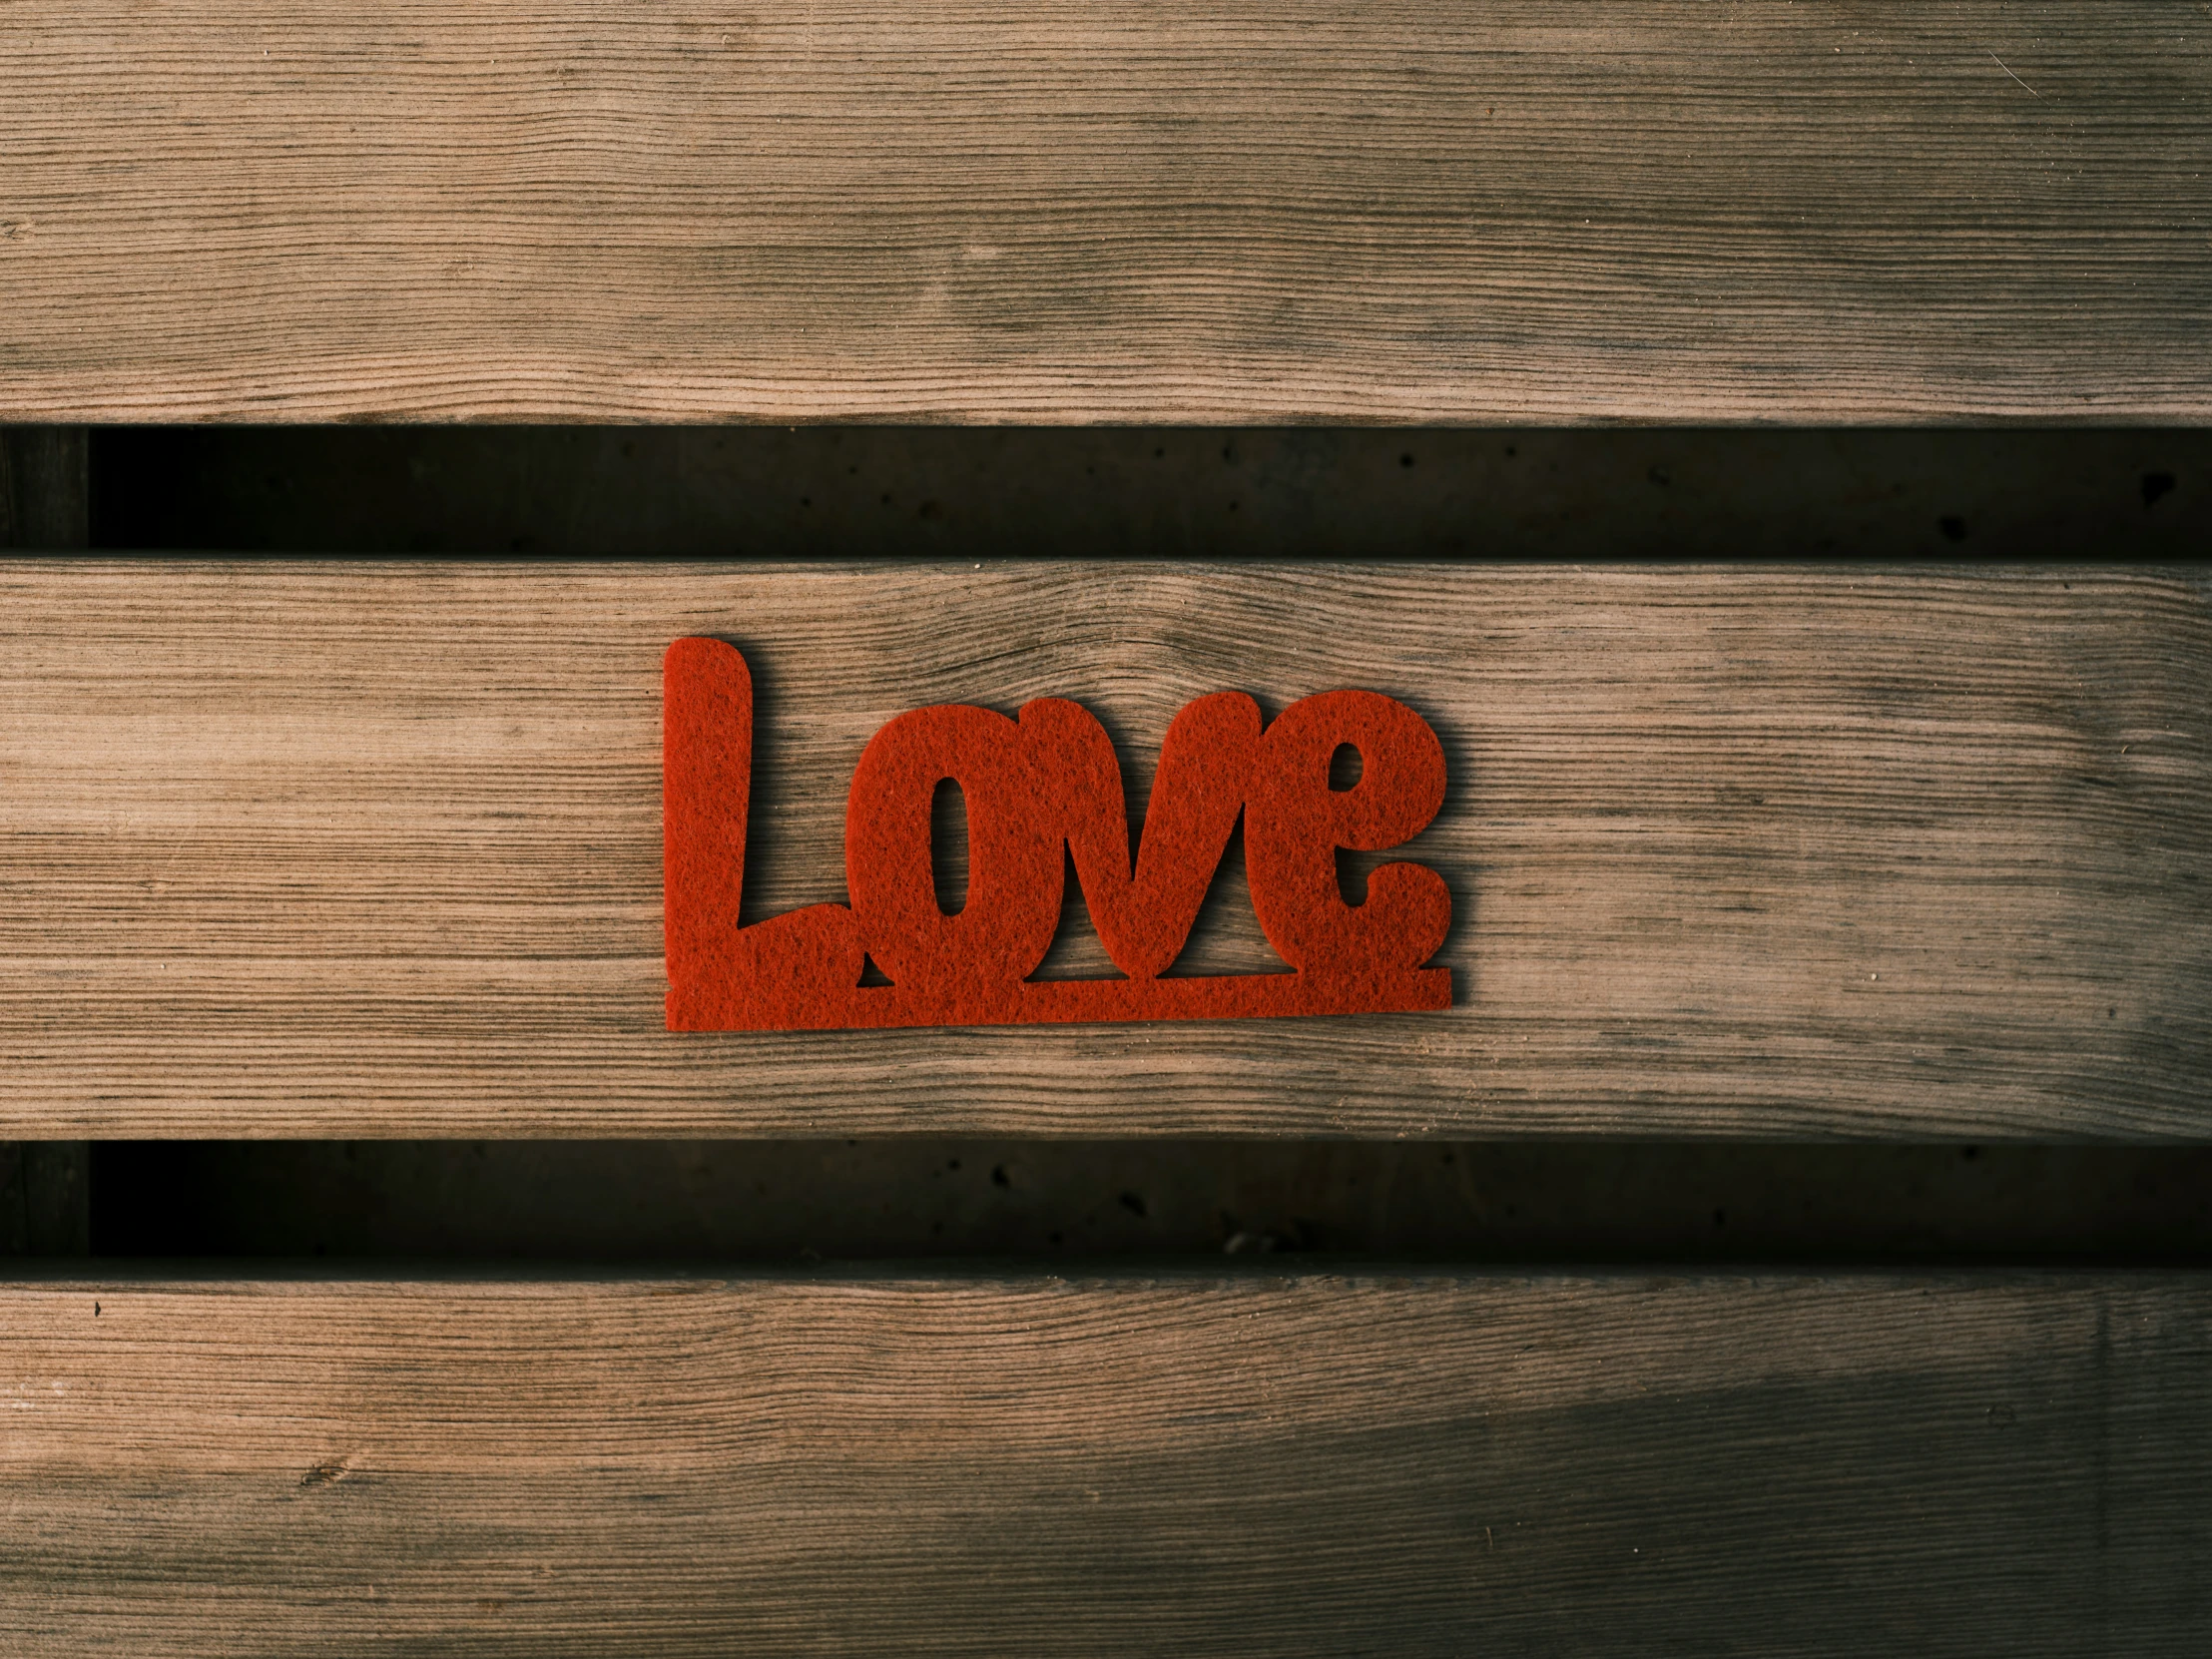 the word love is placed in the wood